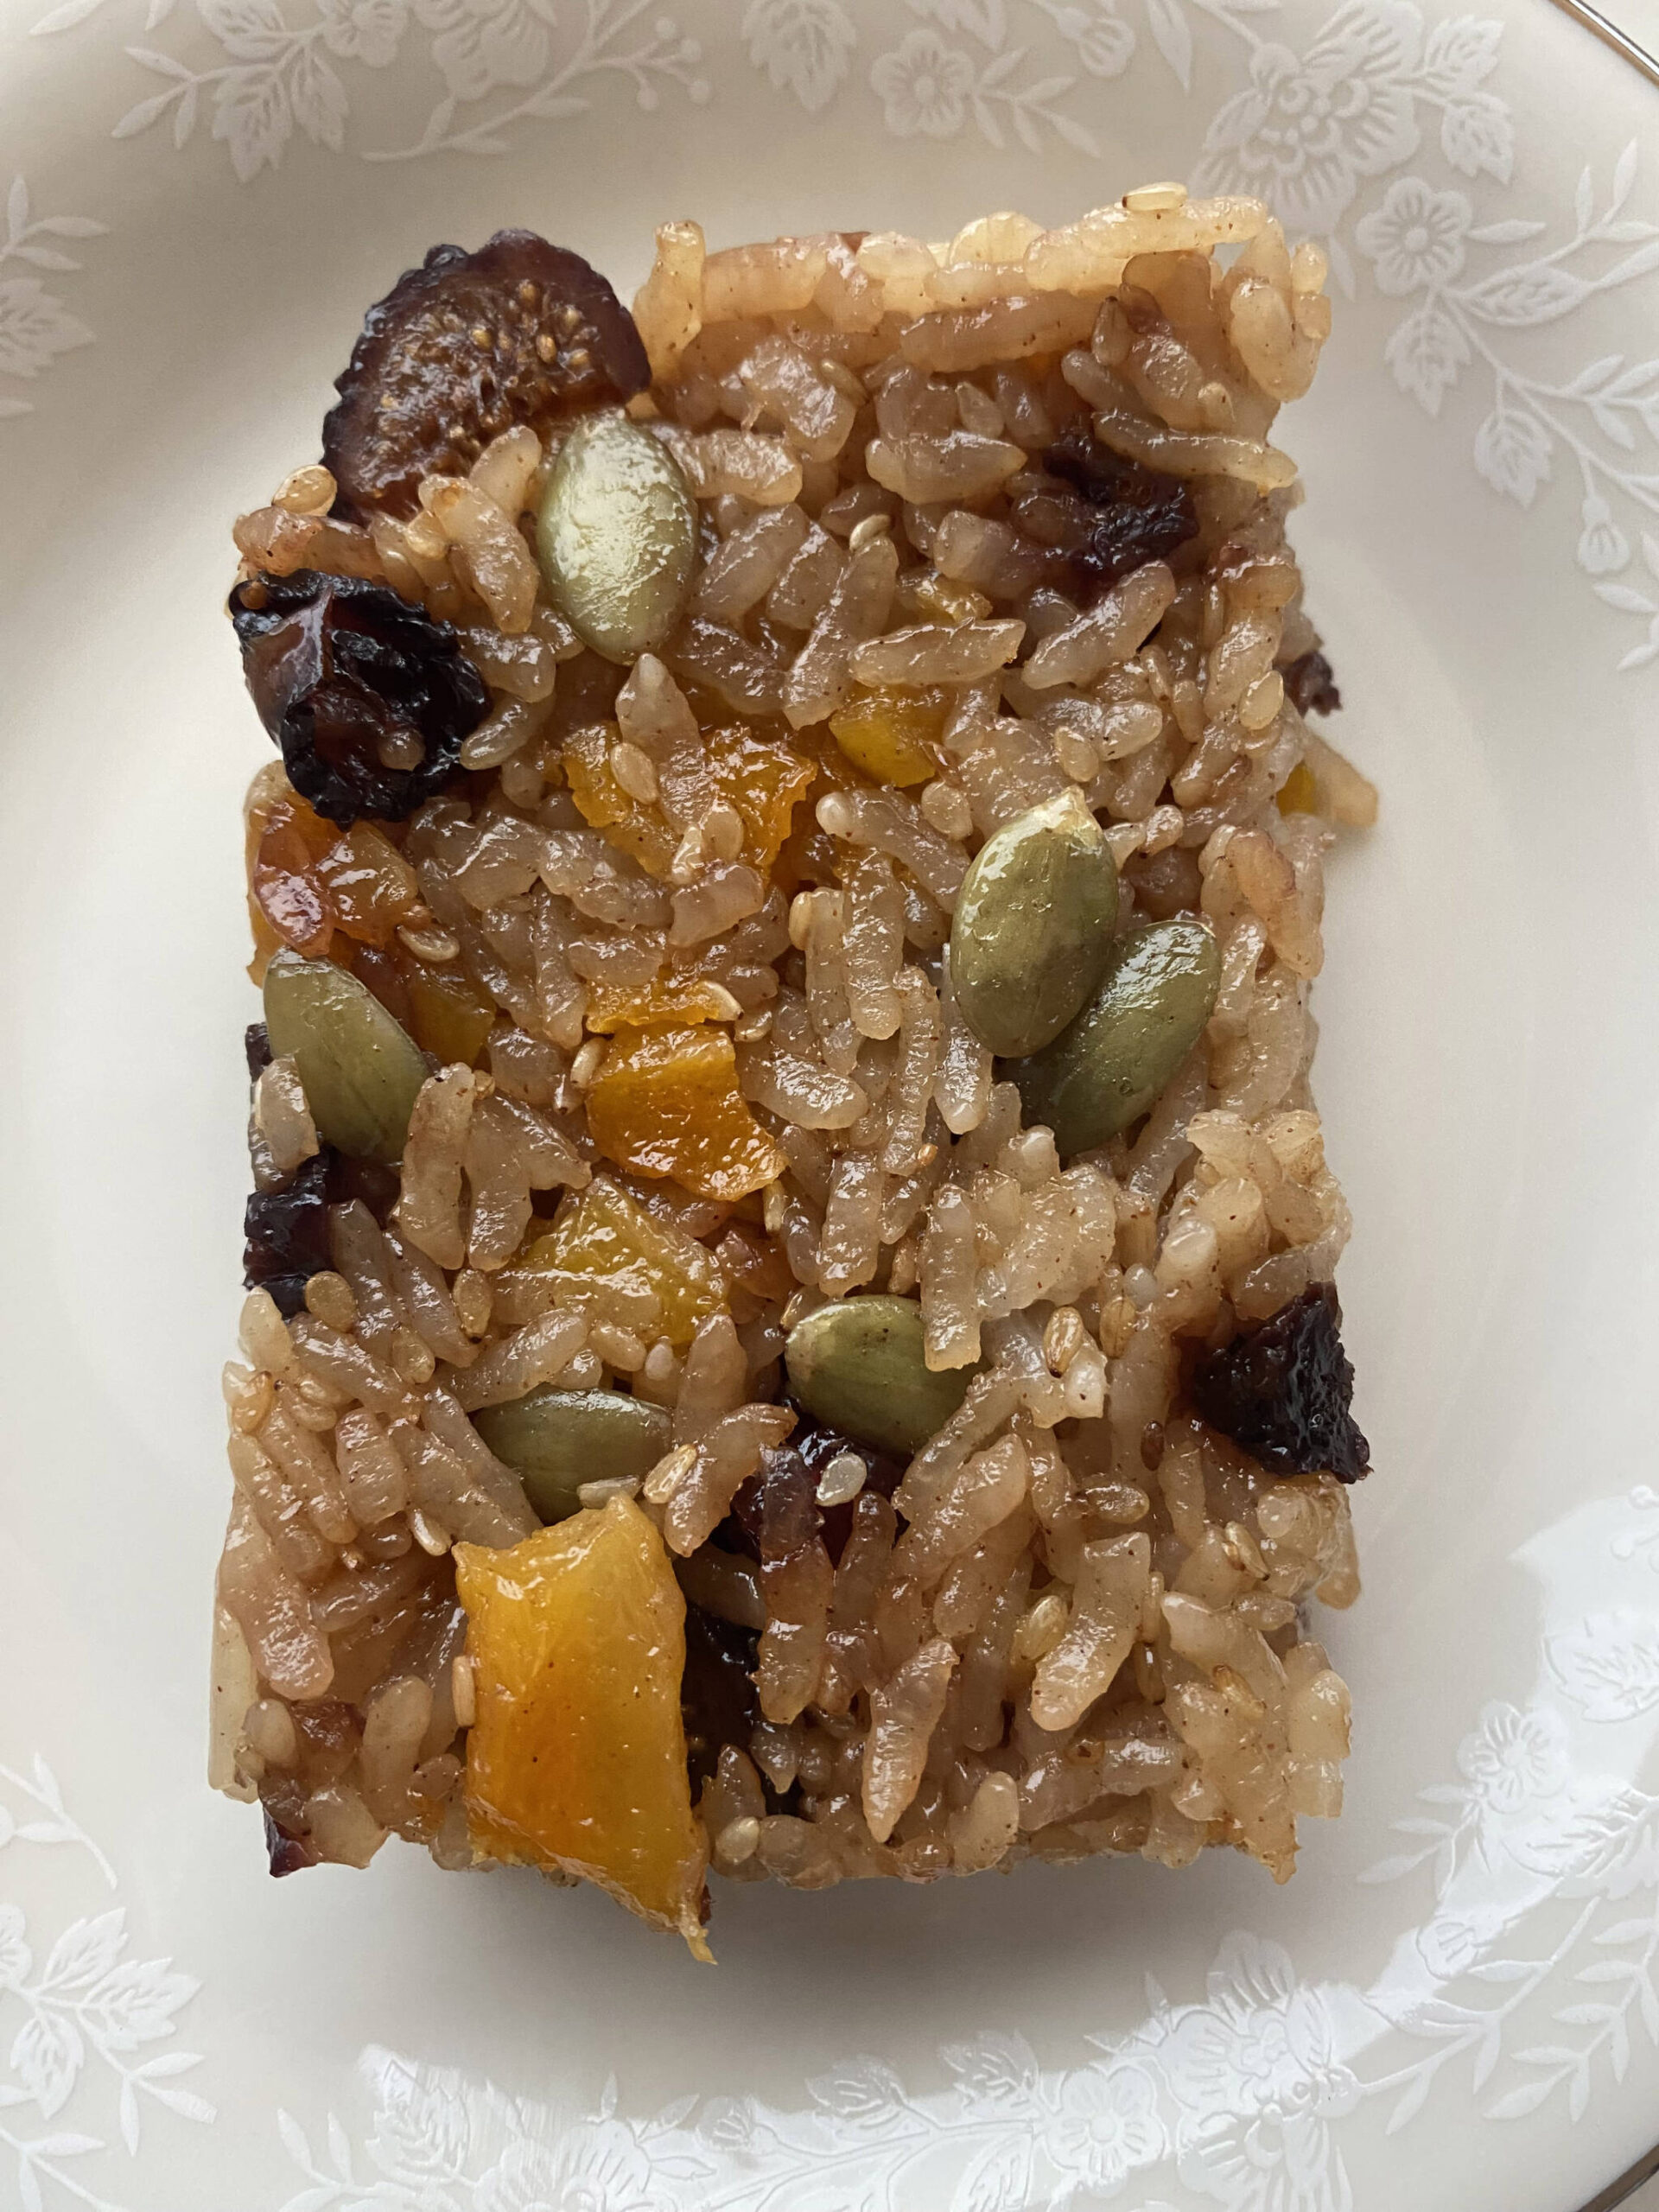 This sweet rice dessert, yaksik, is traditional for New Year’s Day in Korea (specifically, the lunar new year) and is often made as a gift for friends and neighbors. (Photo by Tressa Dale/Peninsula Clarion)